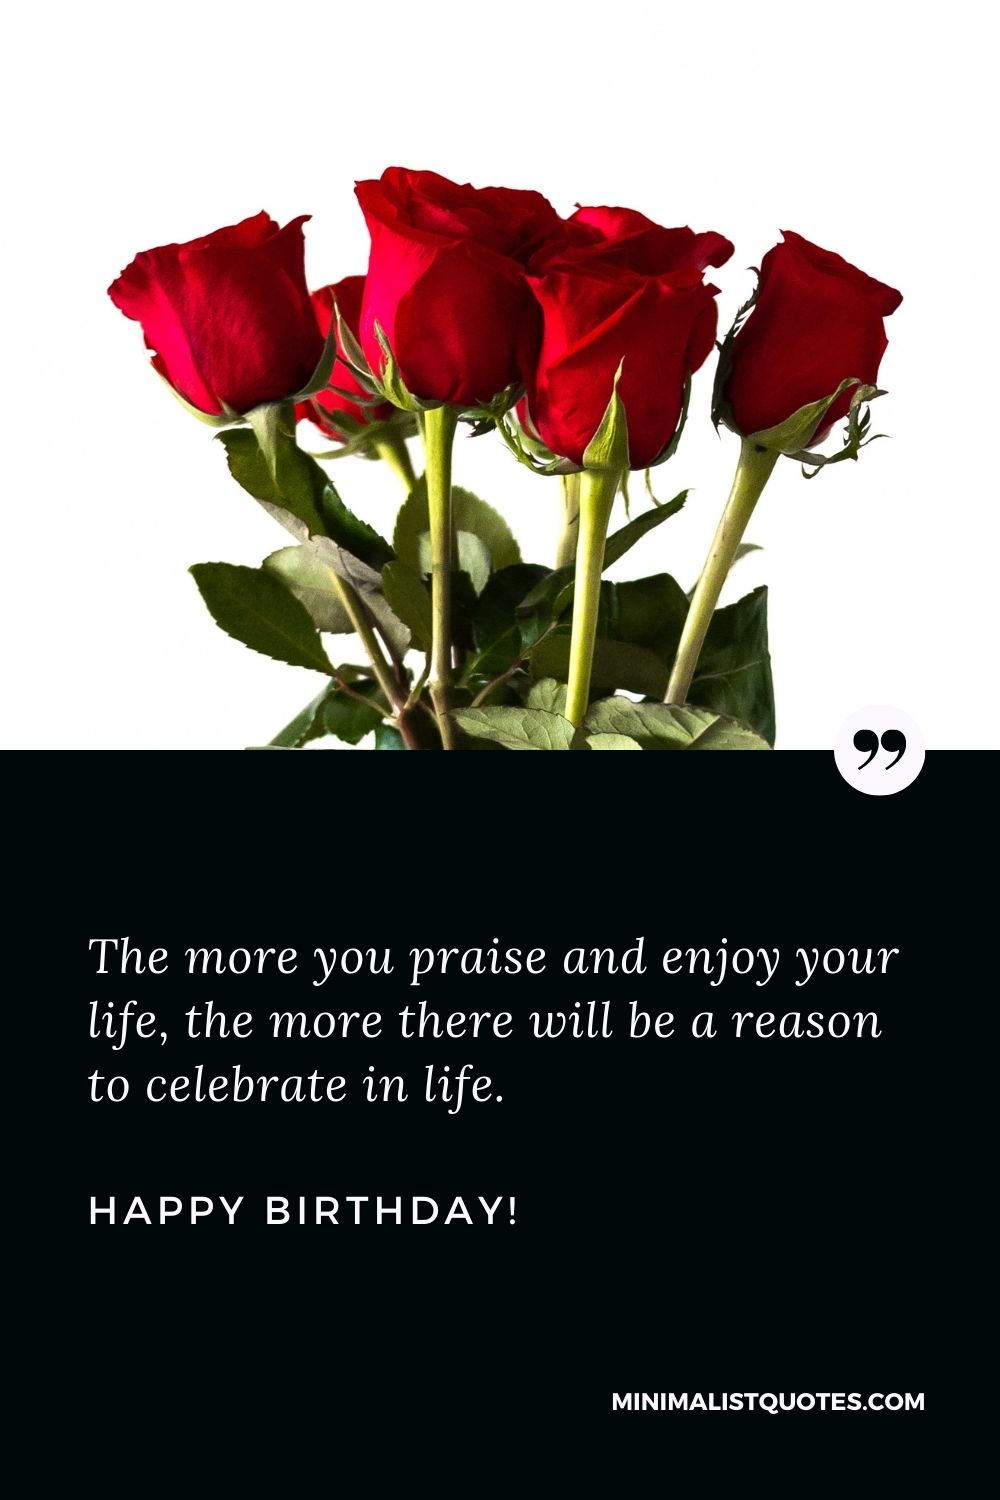 Birthday wishes in English: The more you praise and enjoy your life, the more there will be a reason to celebrate in life. Happy Birthday!